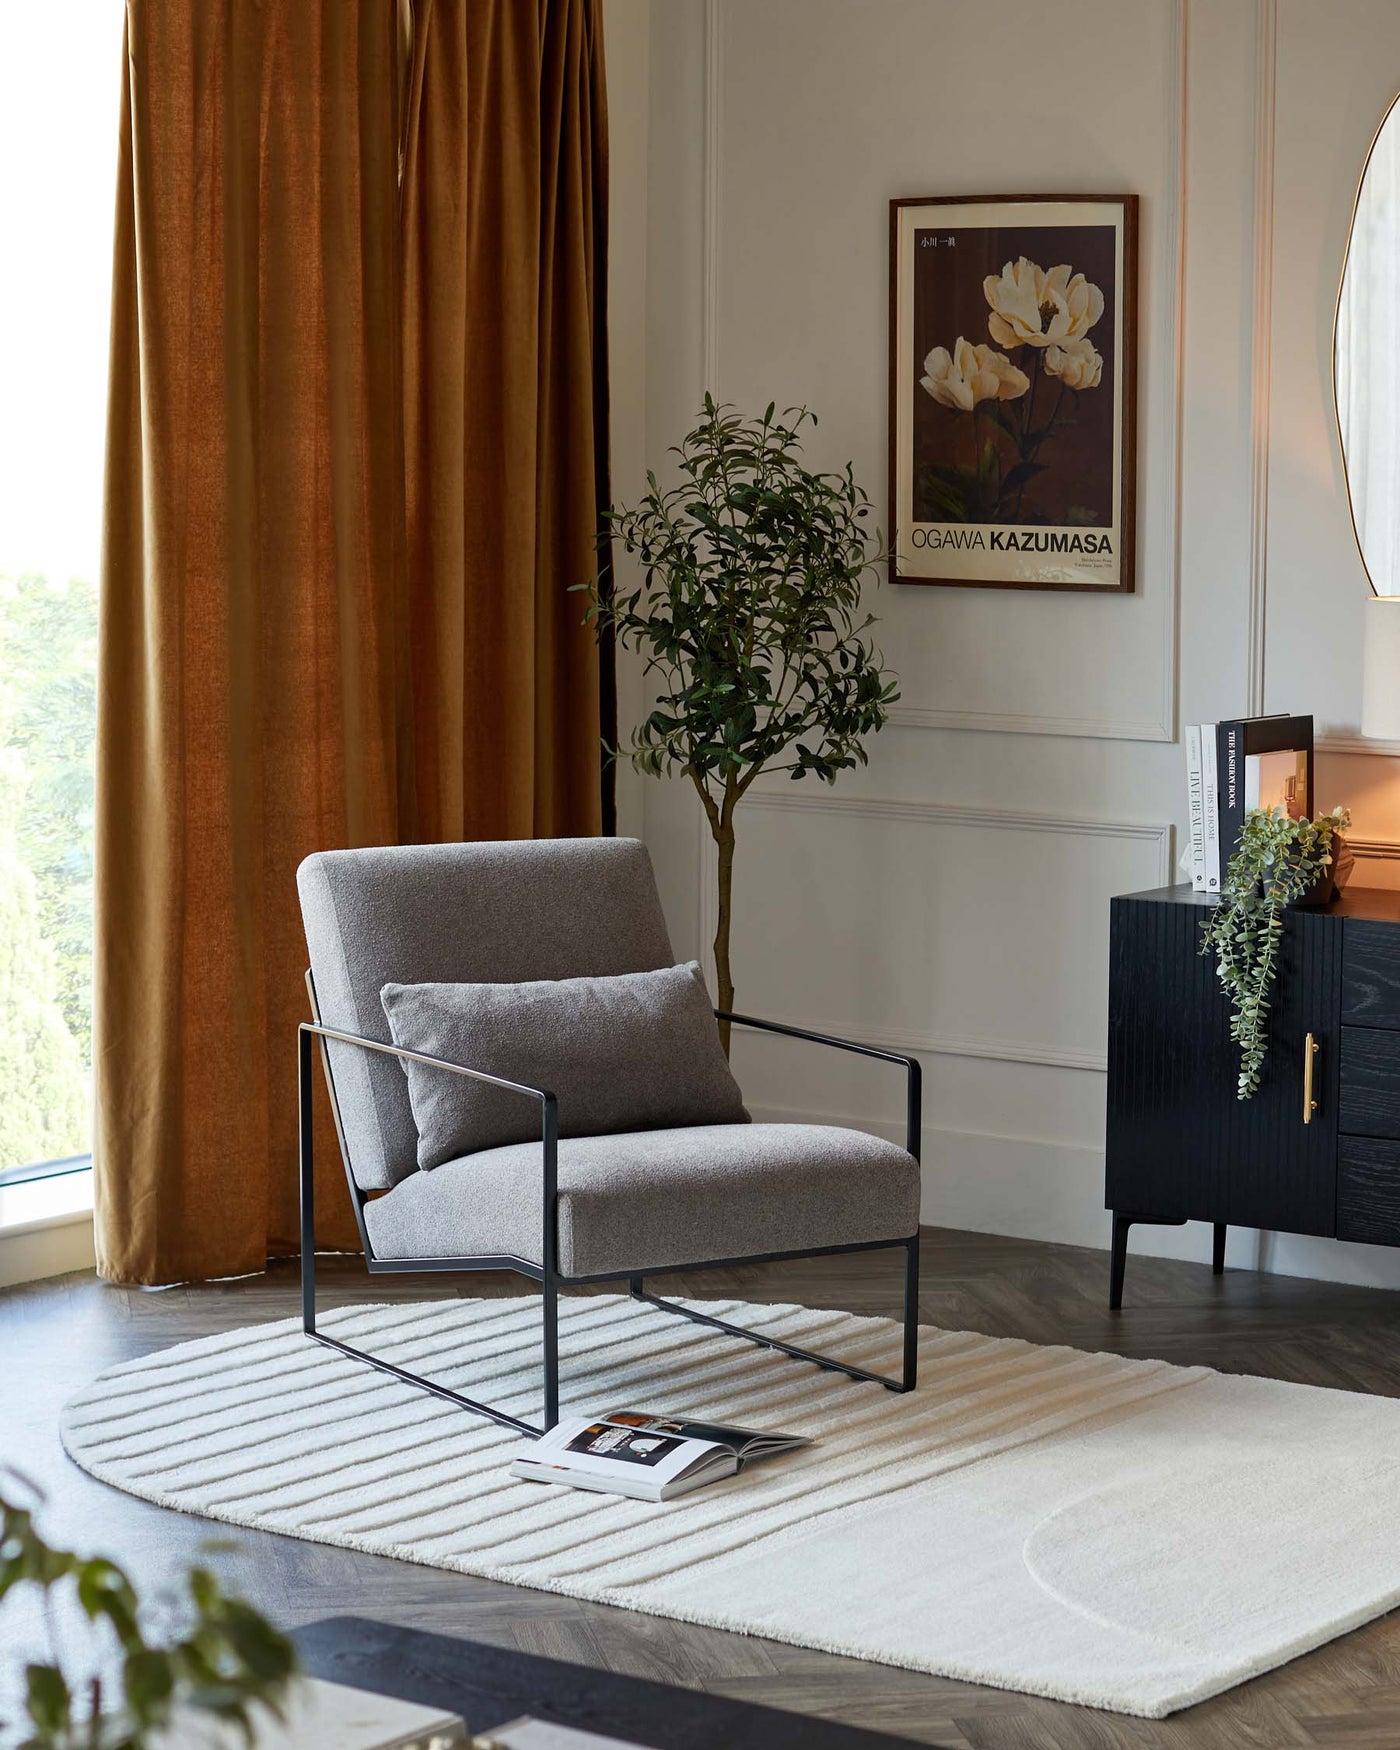 Modern minimalist armchair with a heather-grey upholstery and a slim, black metal frame, beside a small black sideboard cabinet with an understated design and brass hardware accents, all presented on a cream textured area rug.